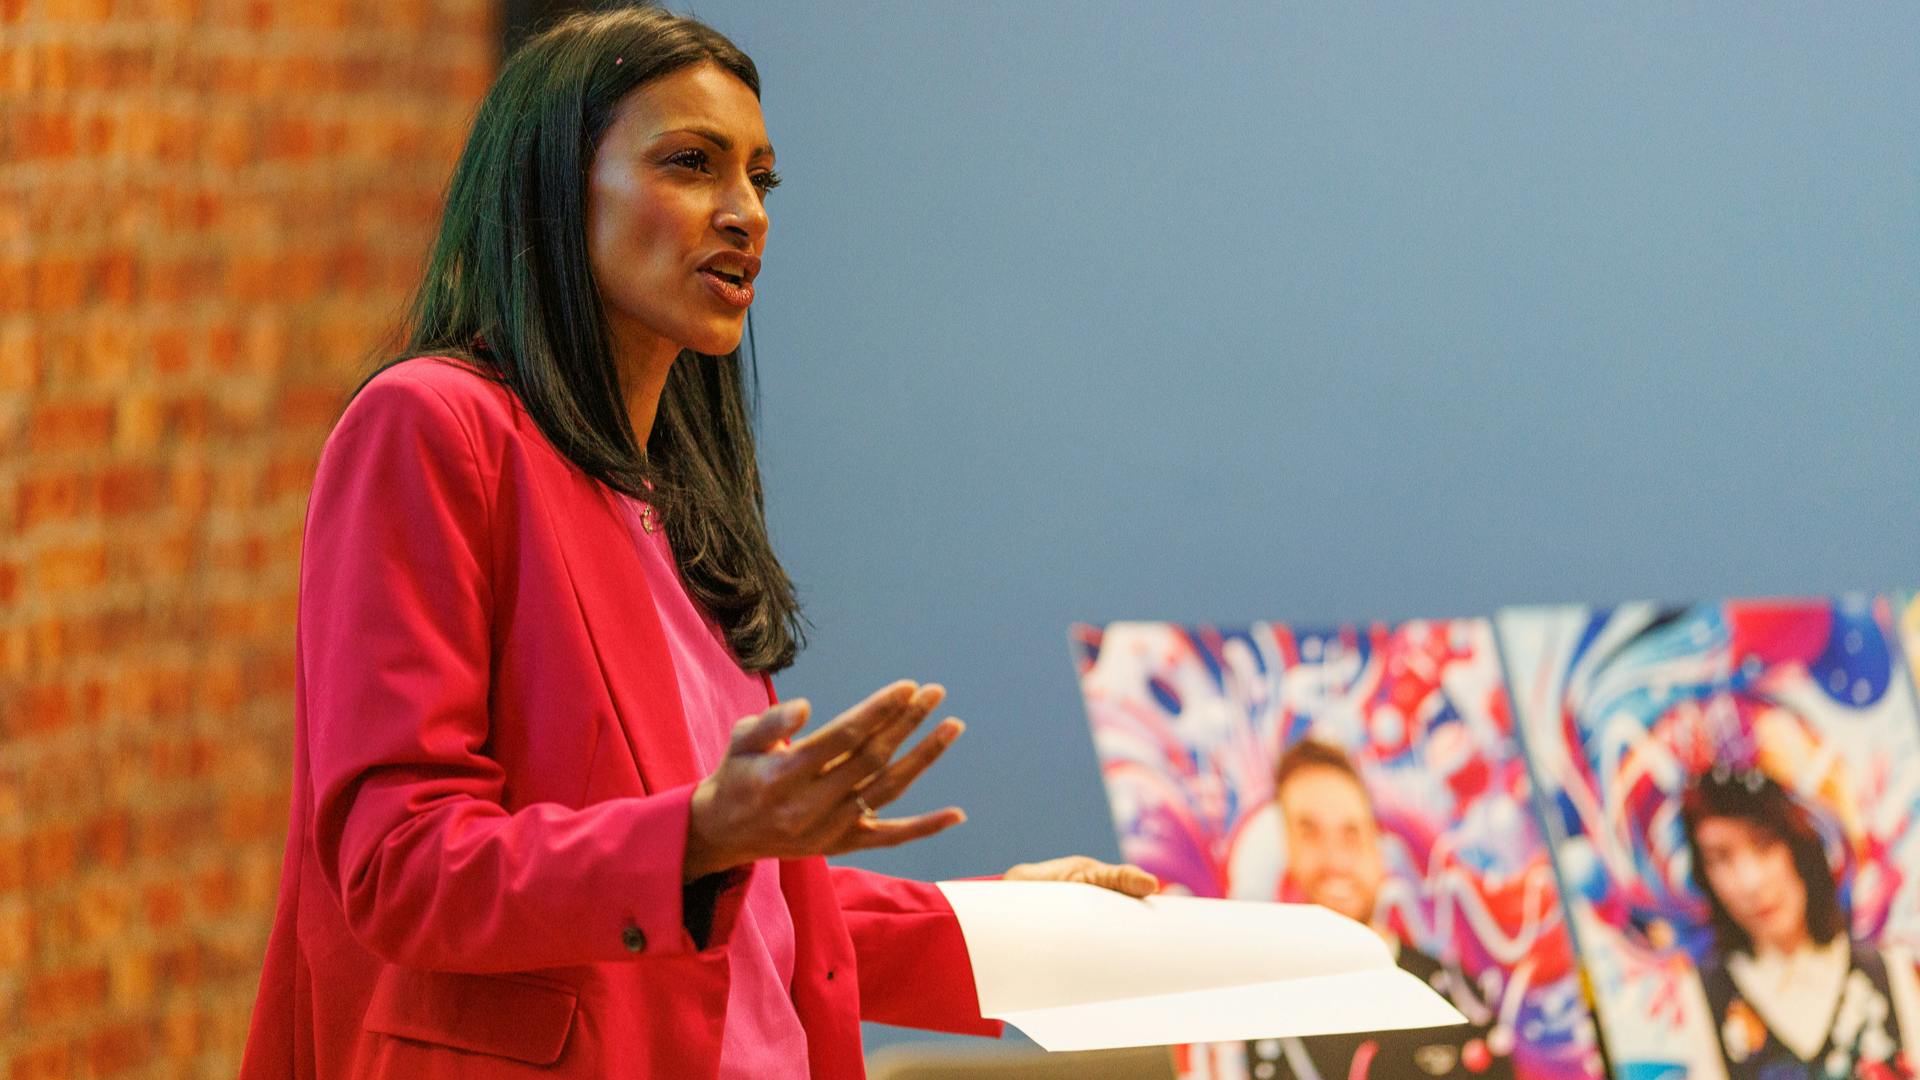 A woman with long dark hair and wearing a pink suit speaks to an audience.